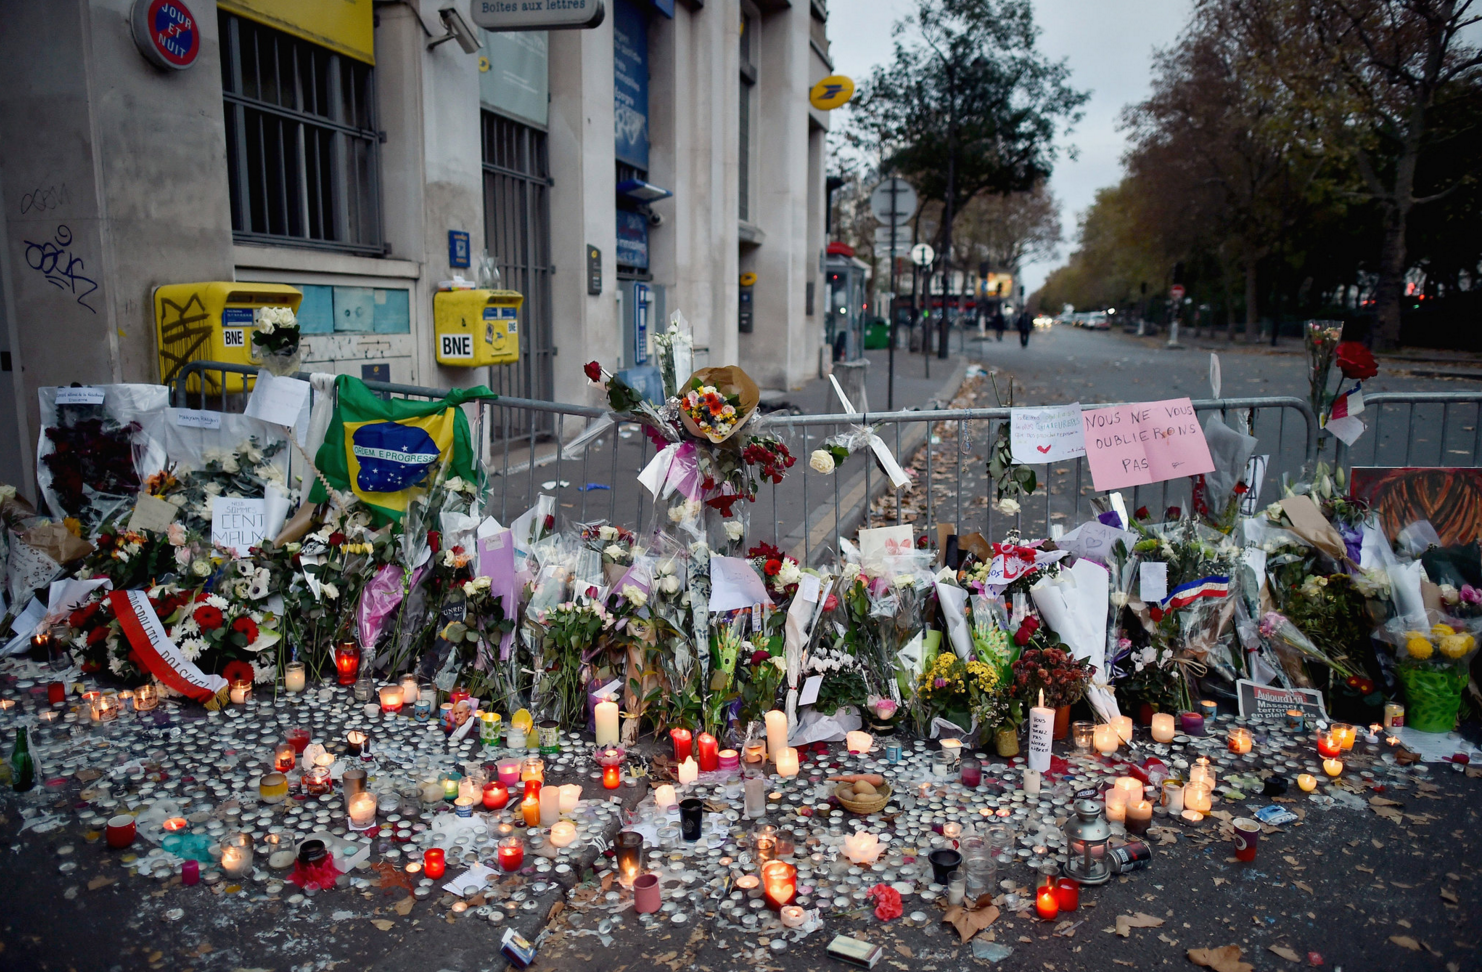 Flowers, candles and messages on Sunday near the Bataclan concert hall in Paris, where at least 89 people were killed. Picture by Jeff J Mitchell | Getty Images